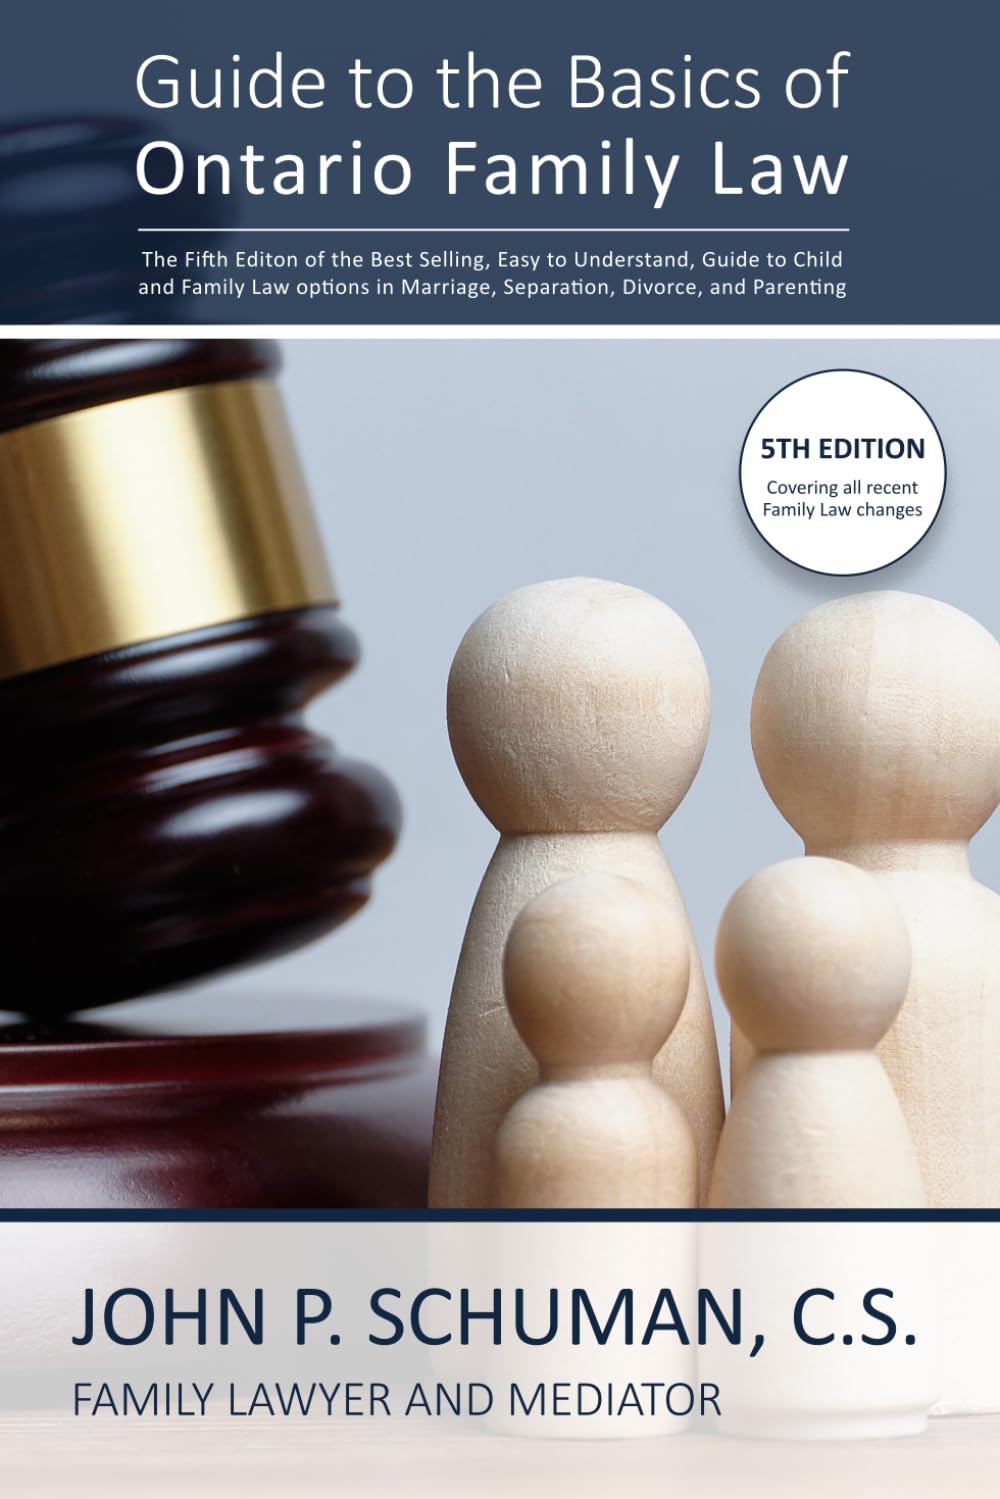 Guide to the Basics of Ontario Family Law 5th Edition book cover